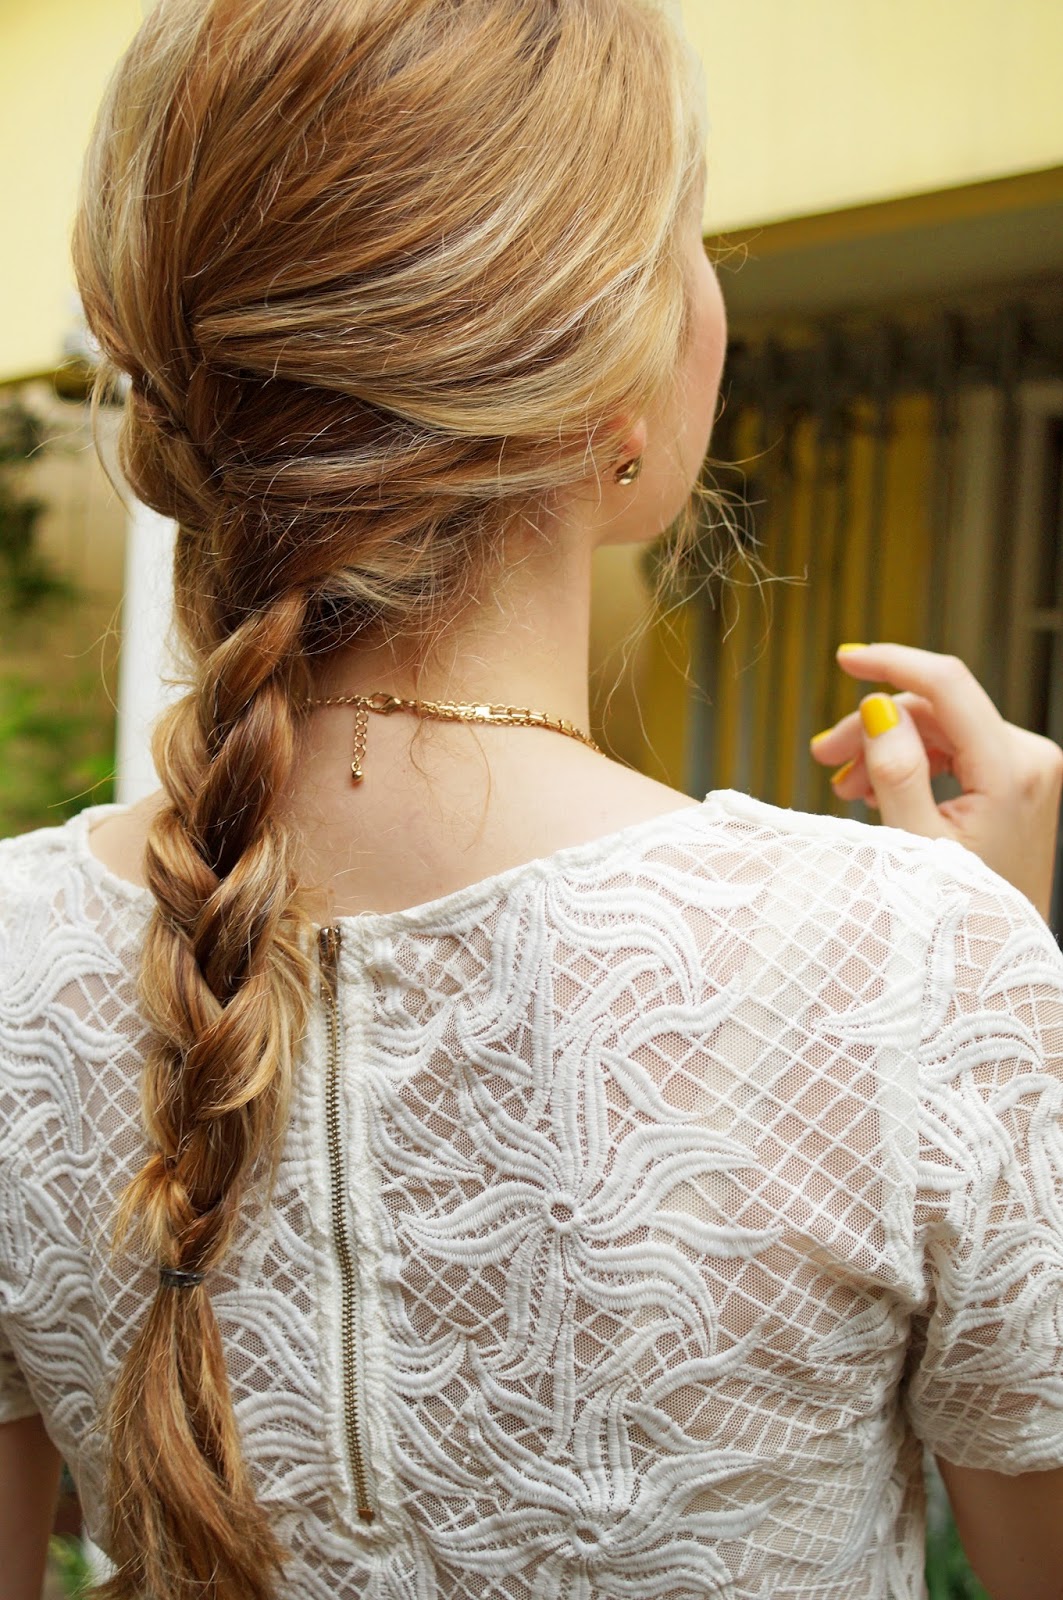 Braid Hairstyles are perfect for Summer!